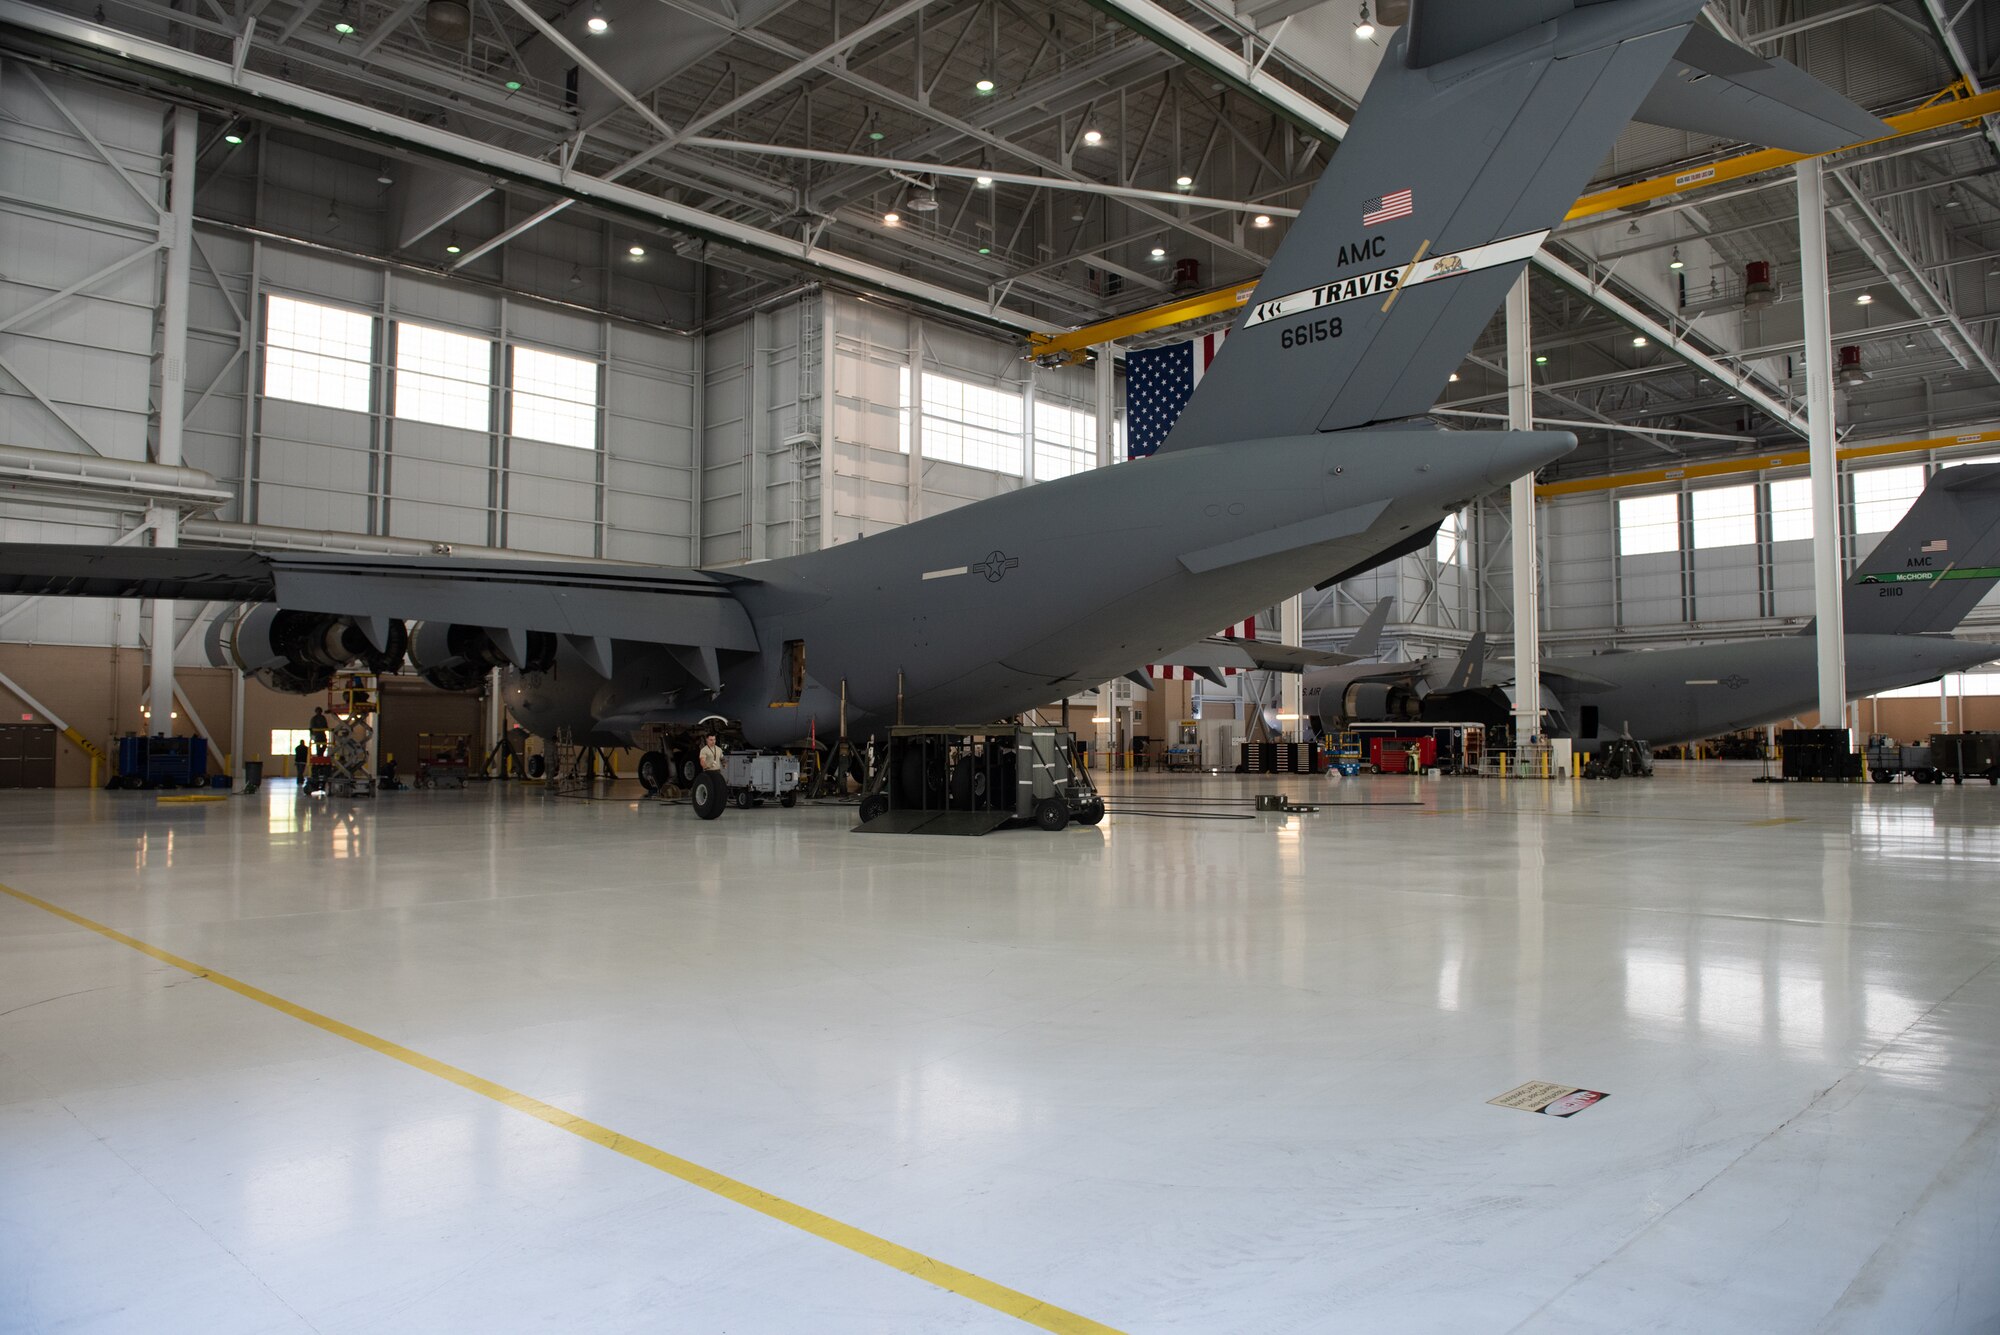 U.S. Air Force Airmen assigned to the 860th Aircraft Maintenance Squadron and 62nd Maintenance Squadron inspect a C-17 Globemaster III aircraft June 3, 2019, at Travis Air Force Base, California. The Airmen have completed 18 C-17 inspections since February. (U.S. Air Force photo by Tech. Sgt. James Hodgman)